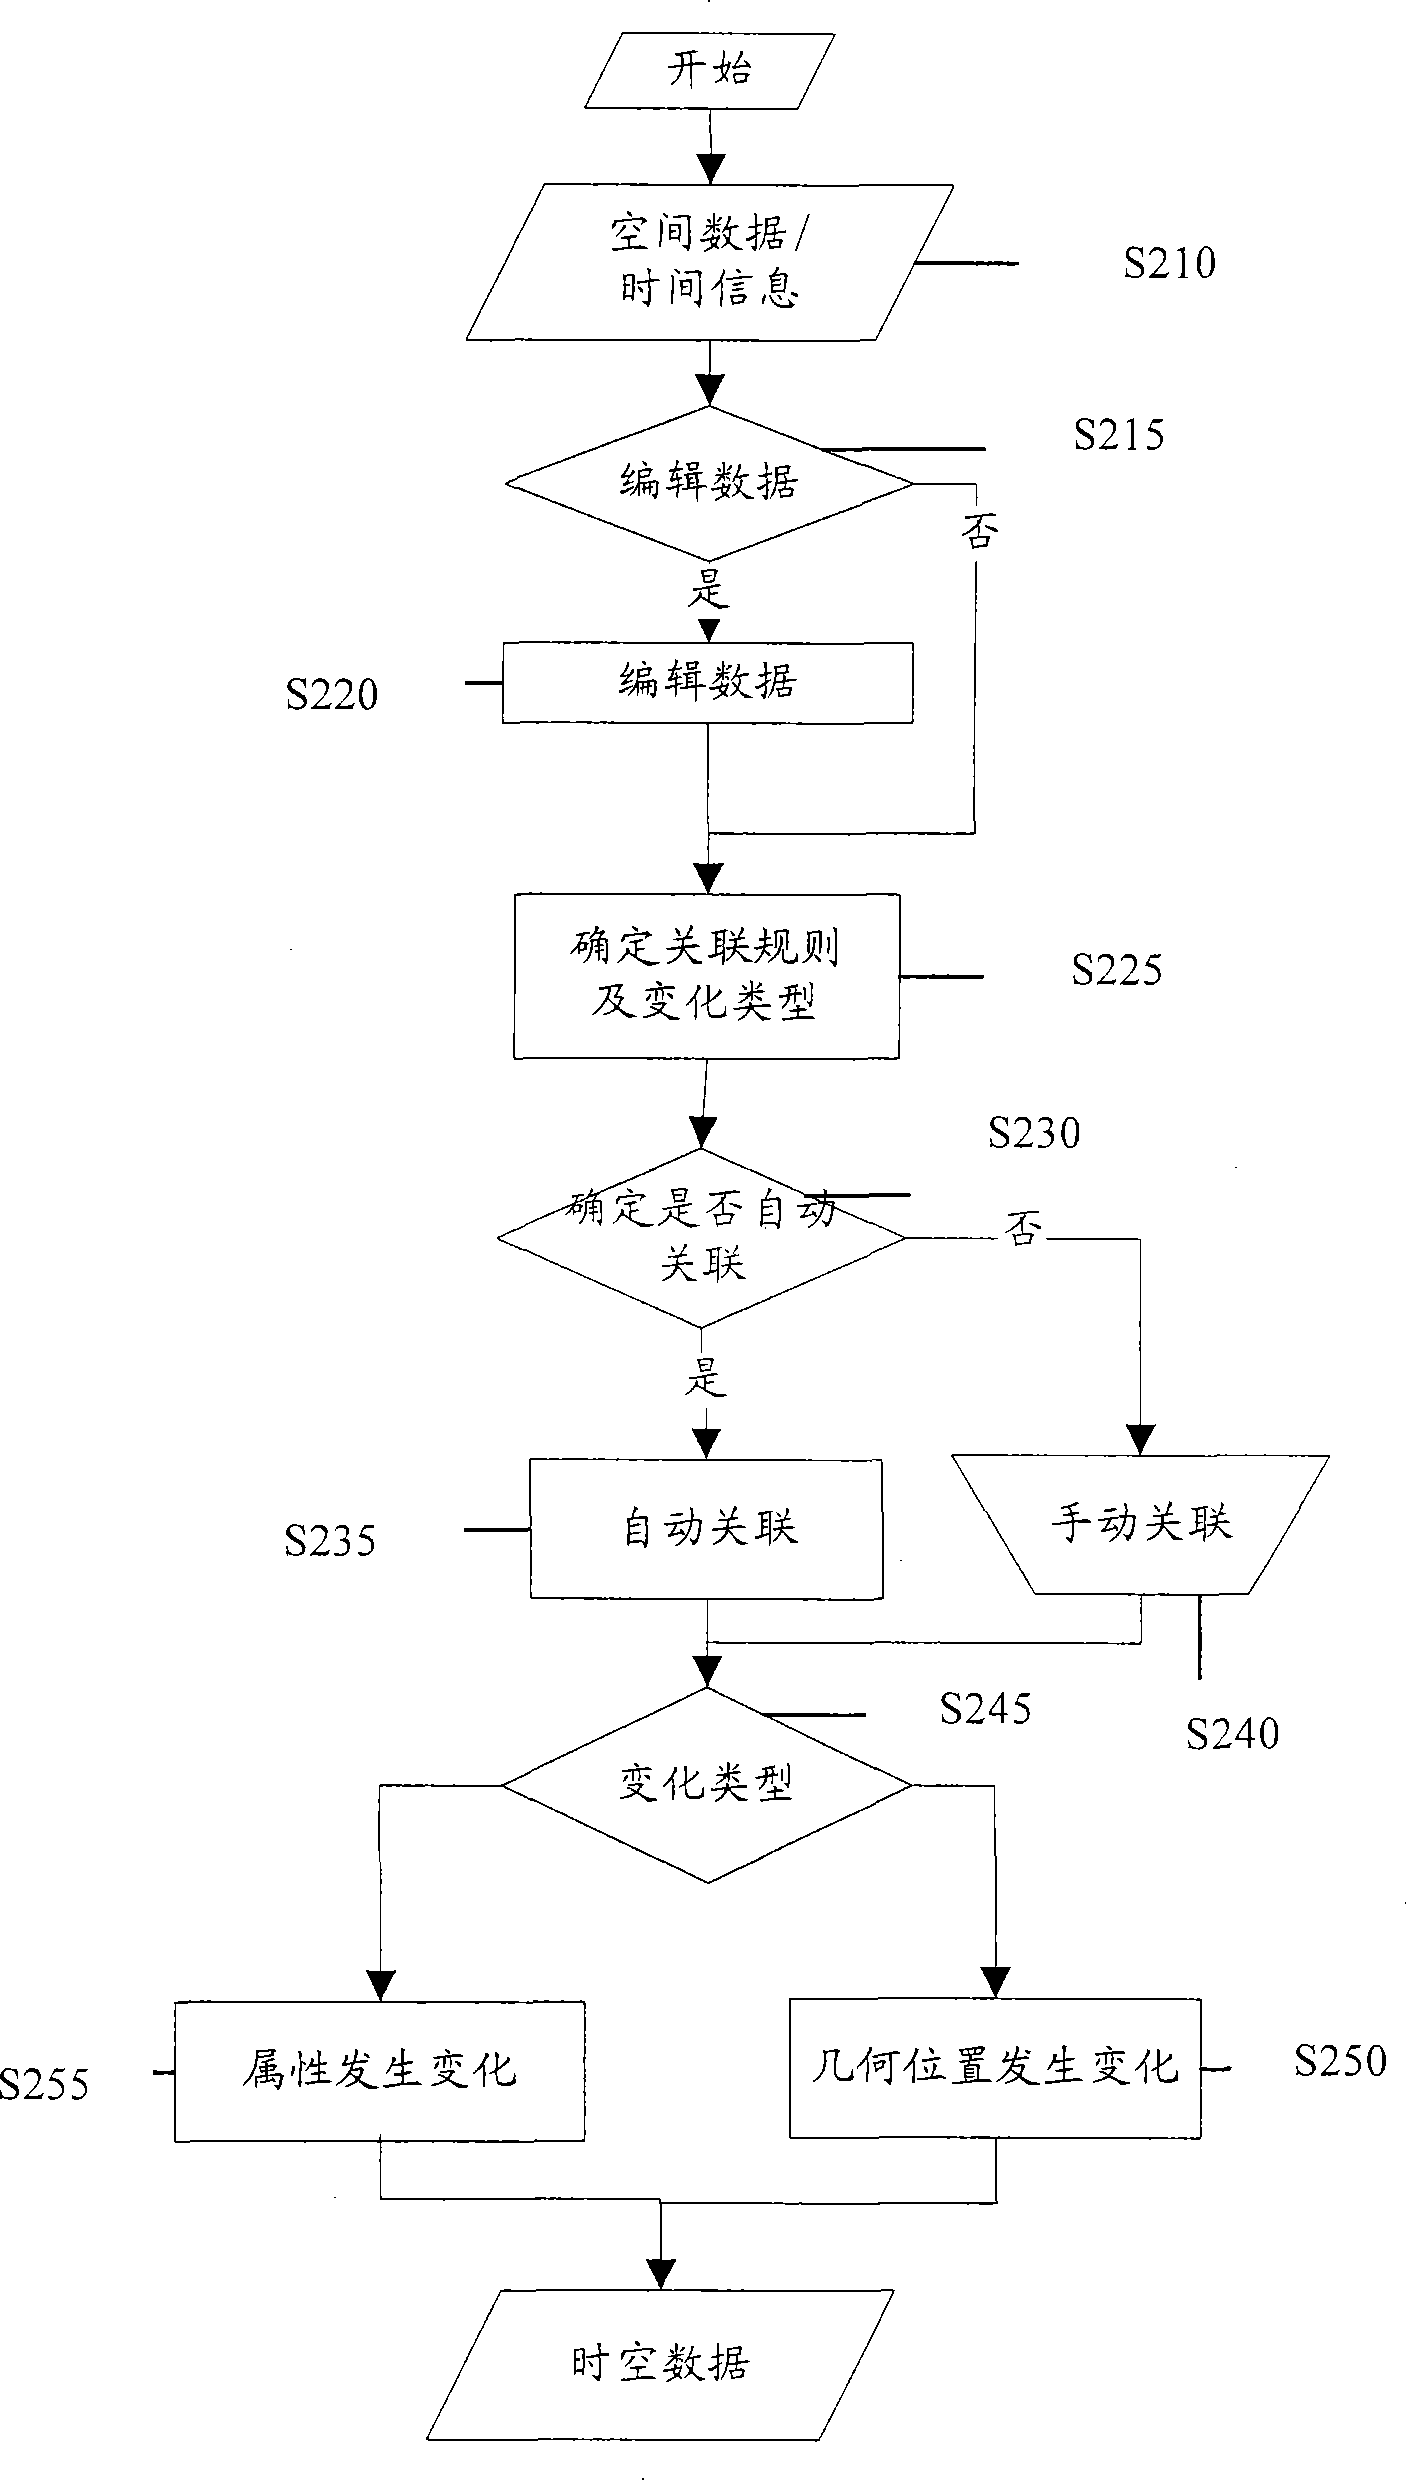 Space-time database administration method and system